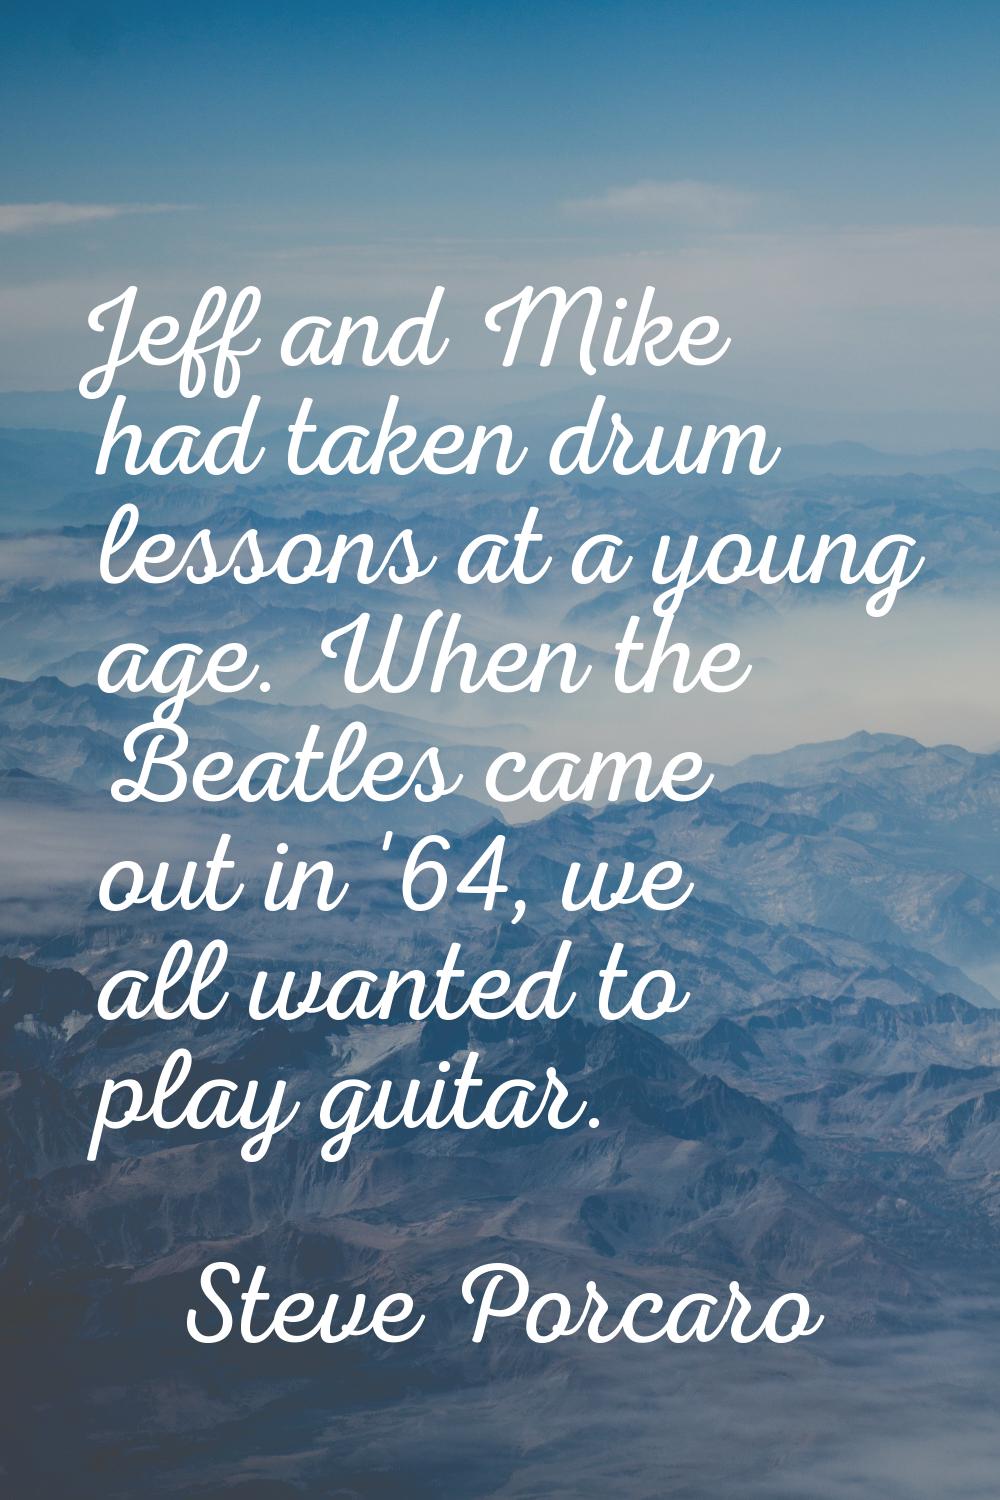 Jeff and Mike had taken drum lessons at a young age. When the Beatles came out in '64, we all wante